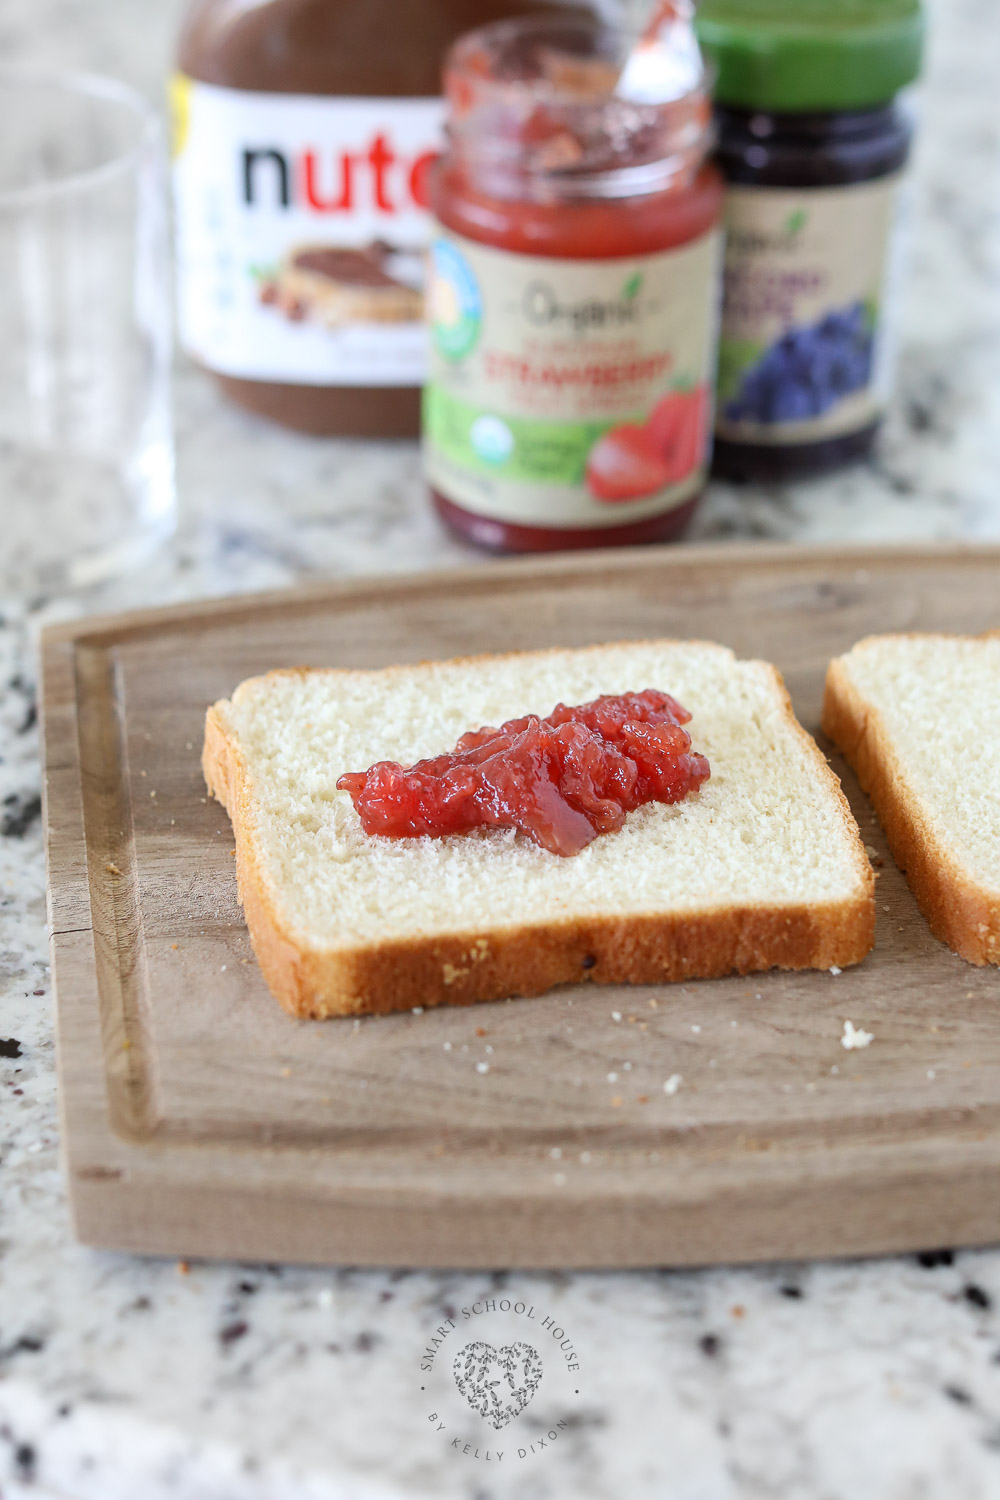 Strawberry jelly on bread